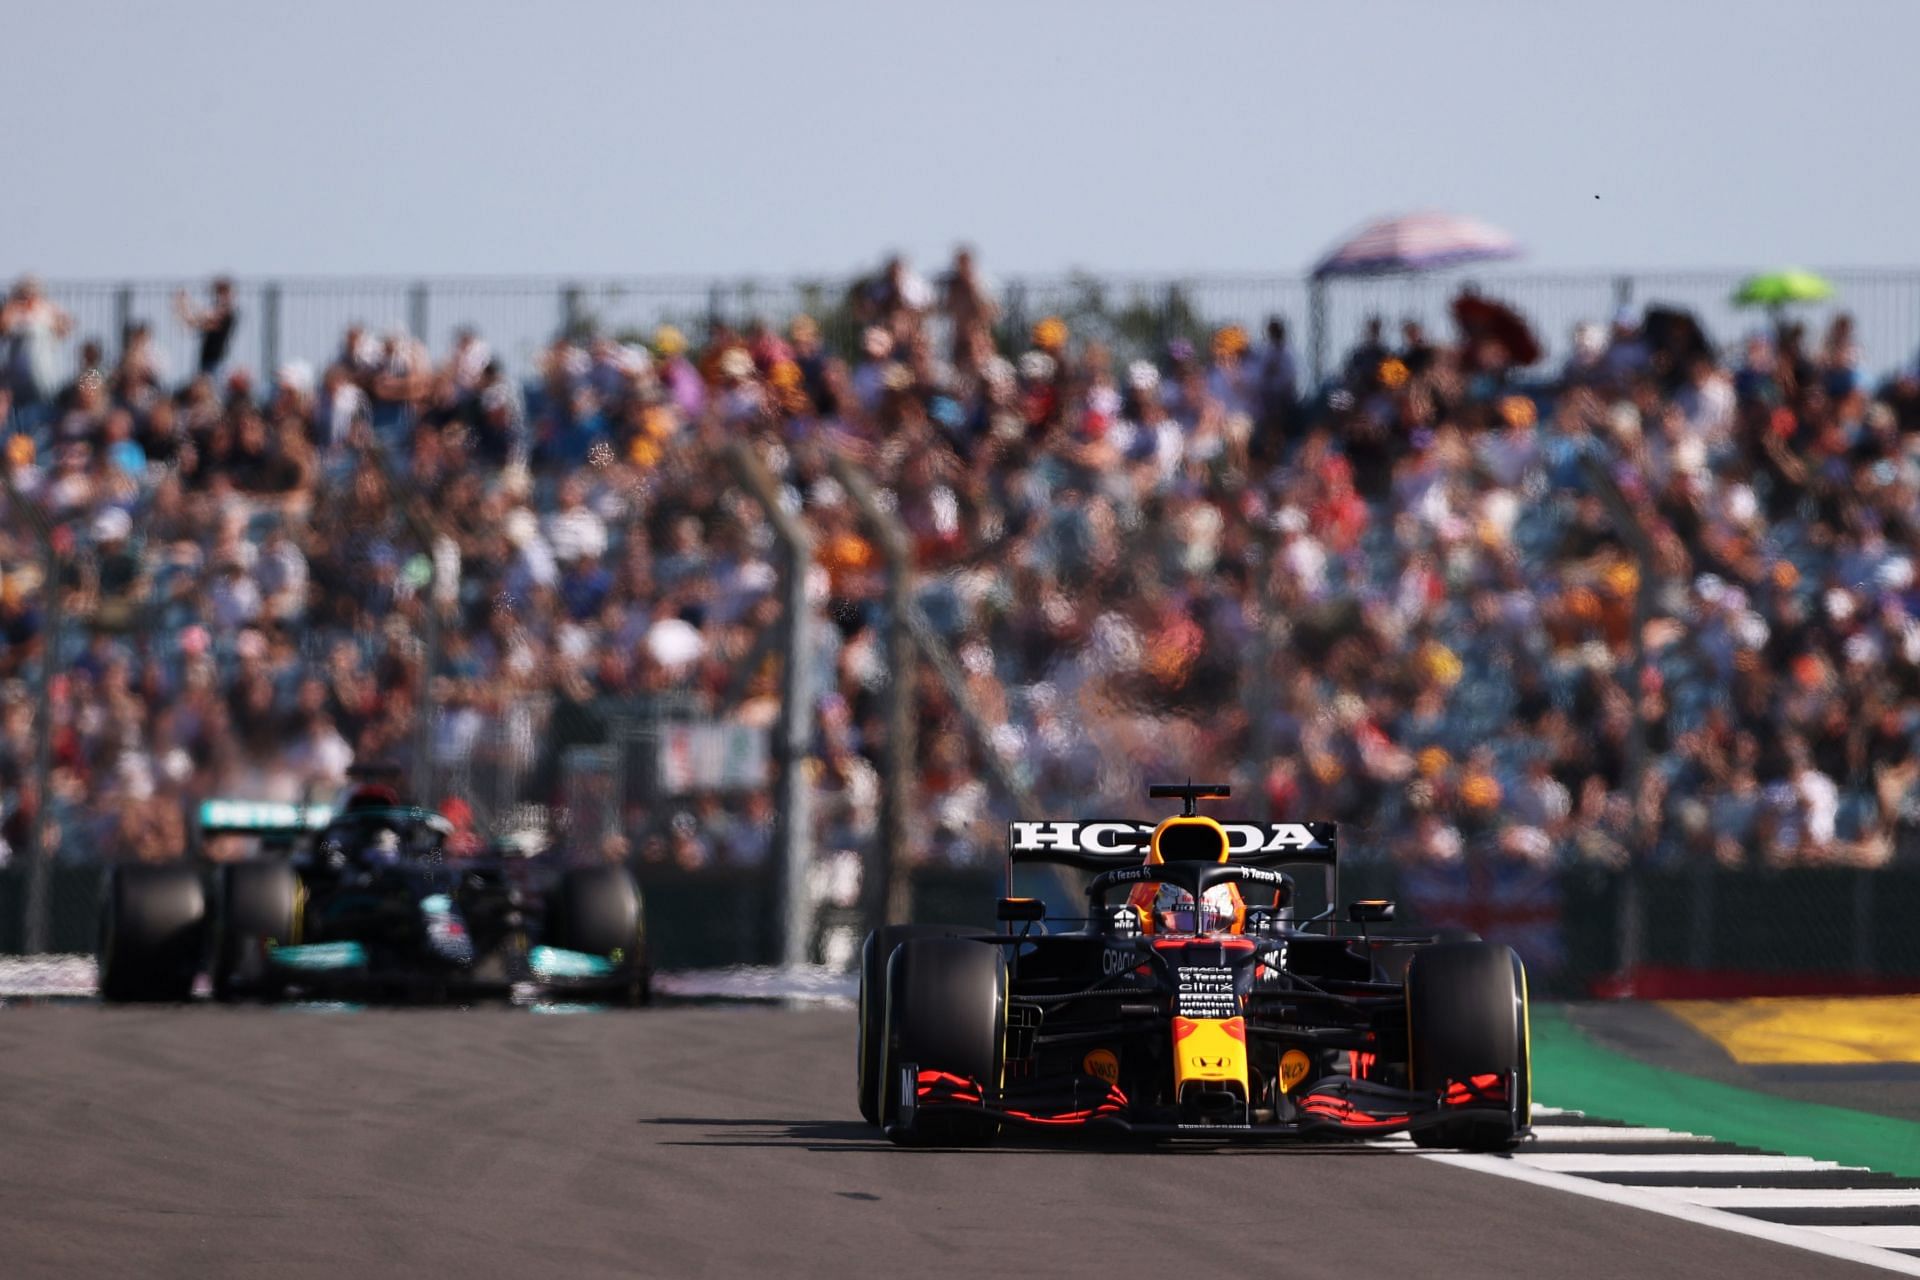 F1 Grand Prix of Great Britain - Max Verstappen of Red Bull wins the sprint race at Silverstone